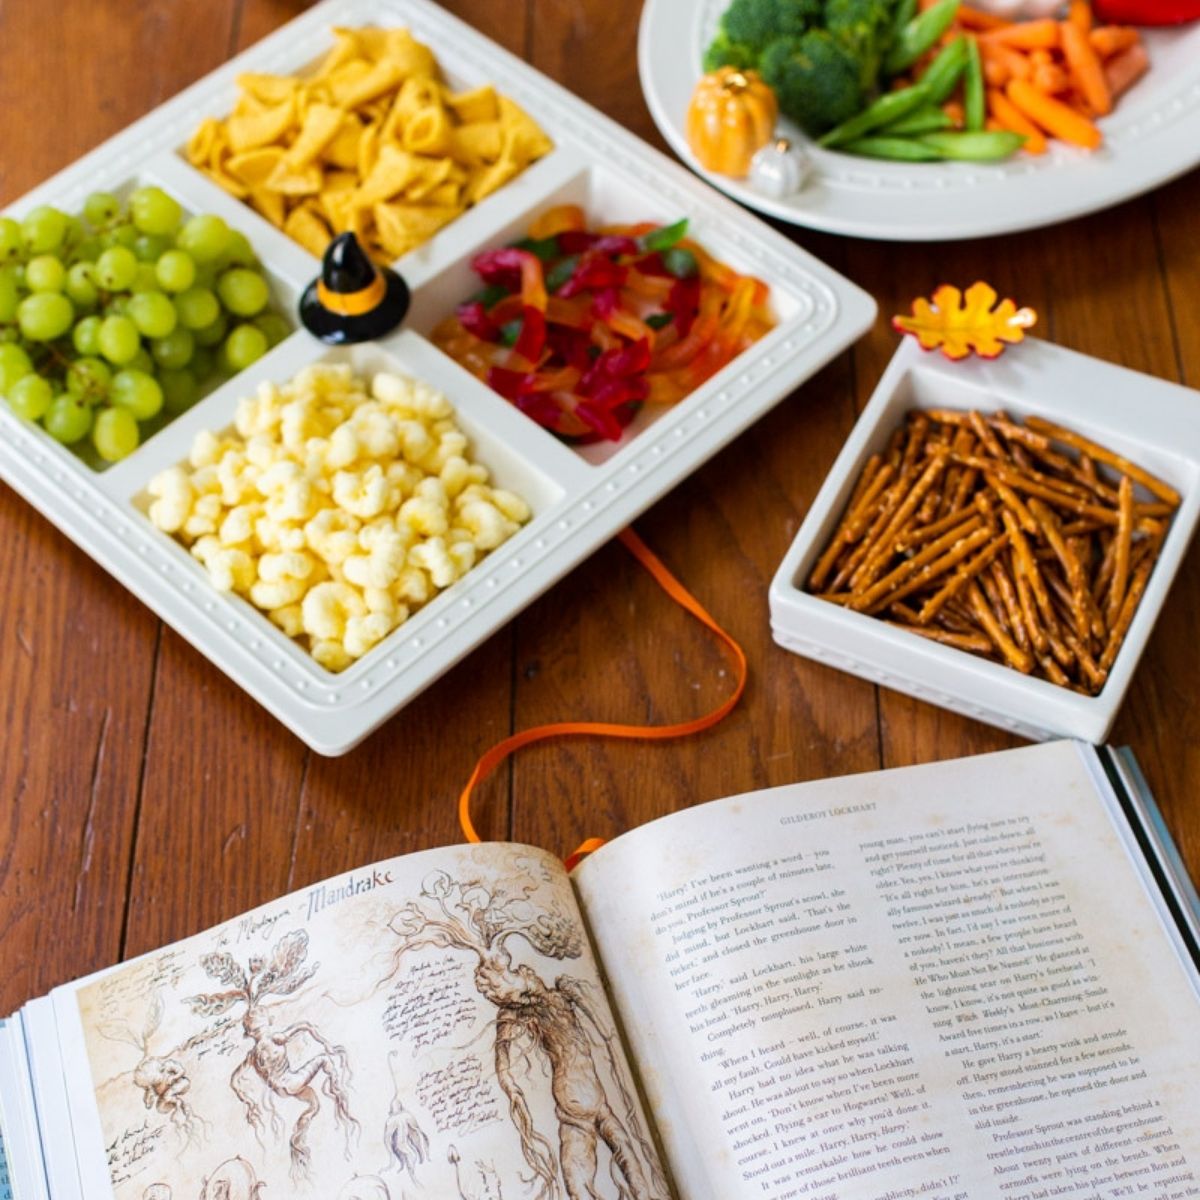 51 Magical Harry Potter Recipes for a Party or Movie Night - Play